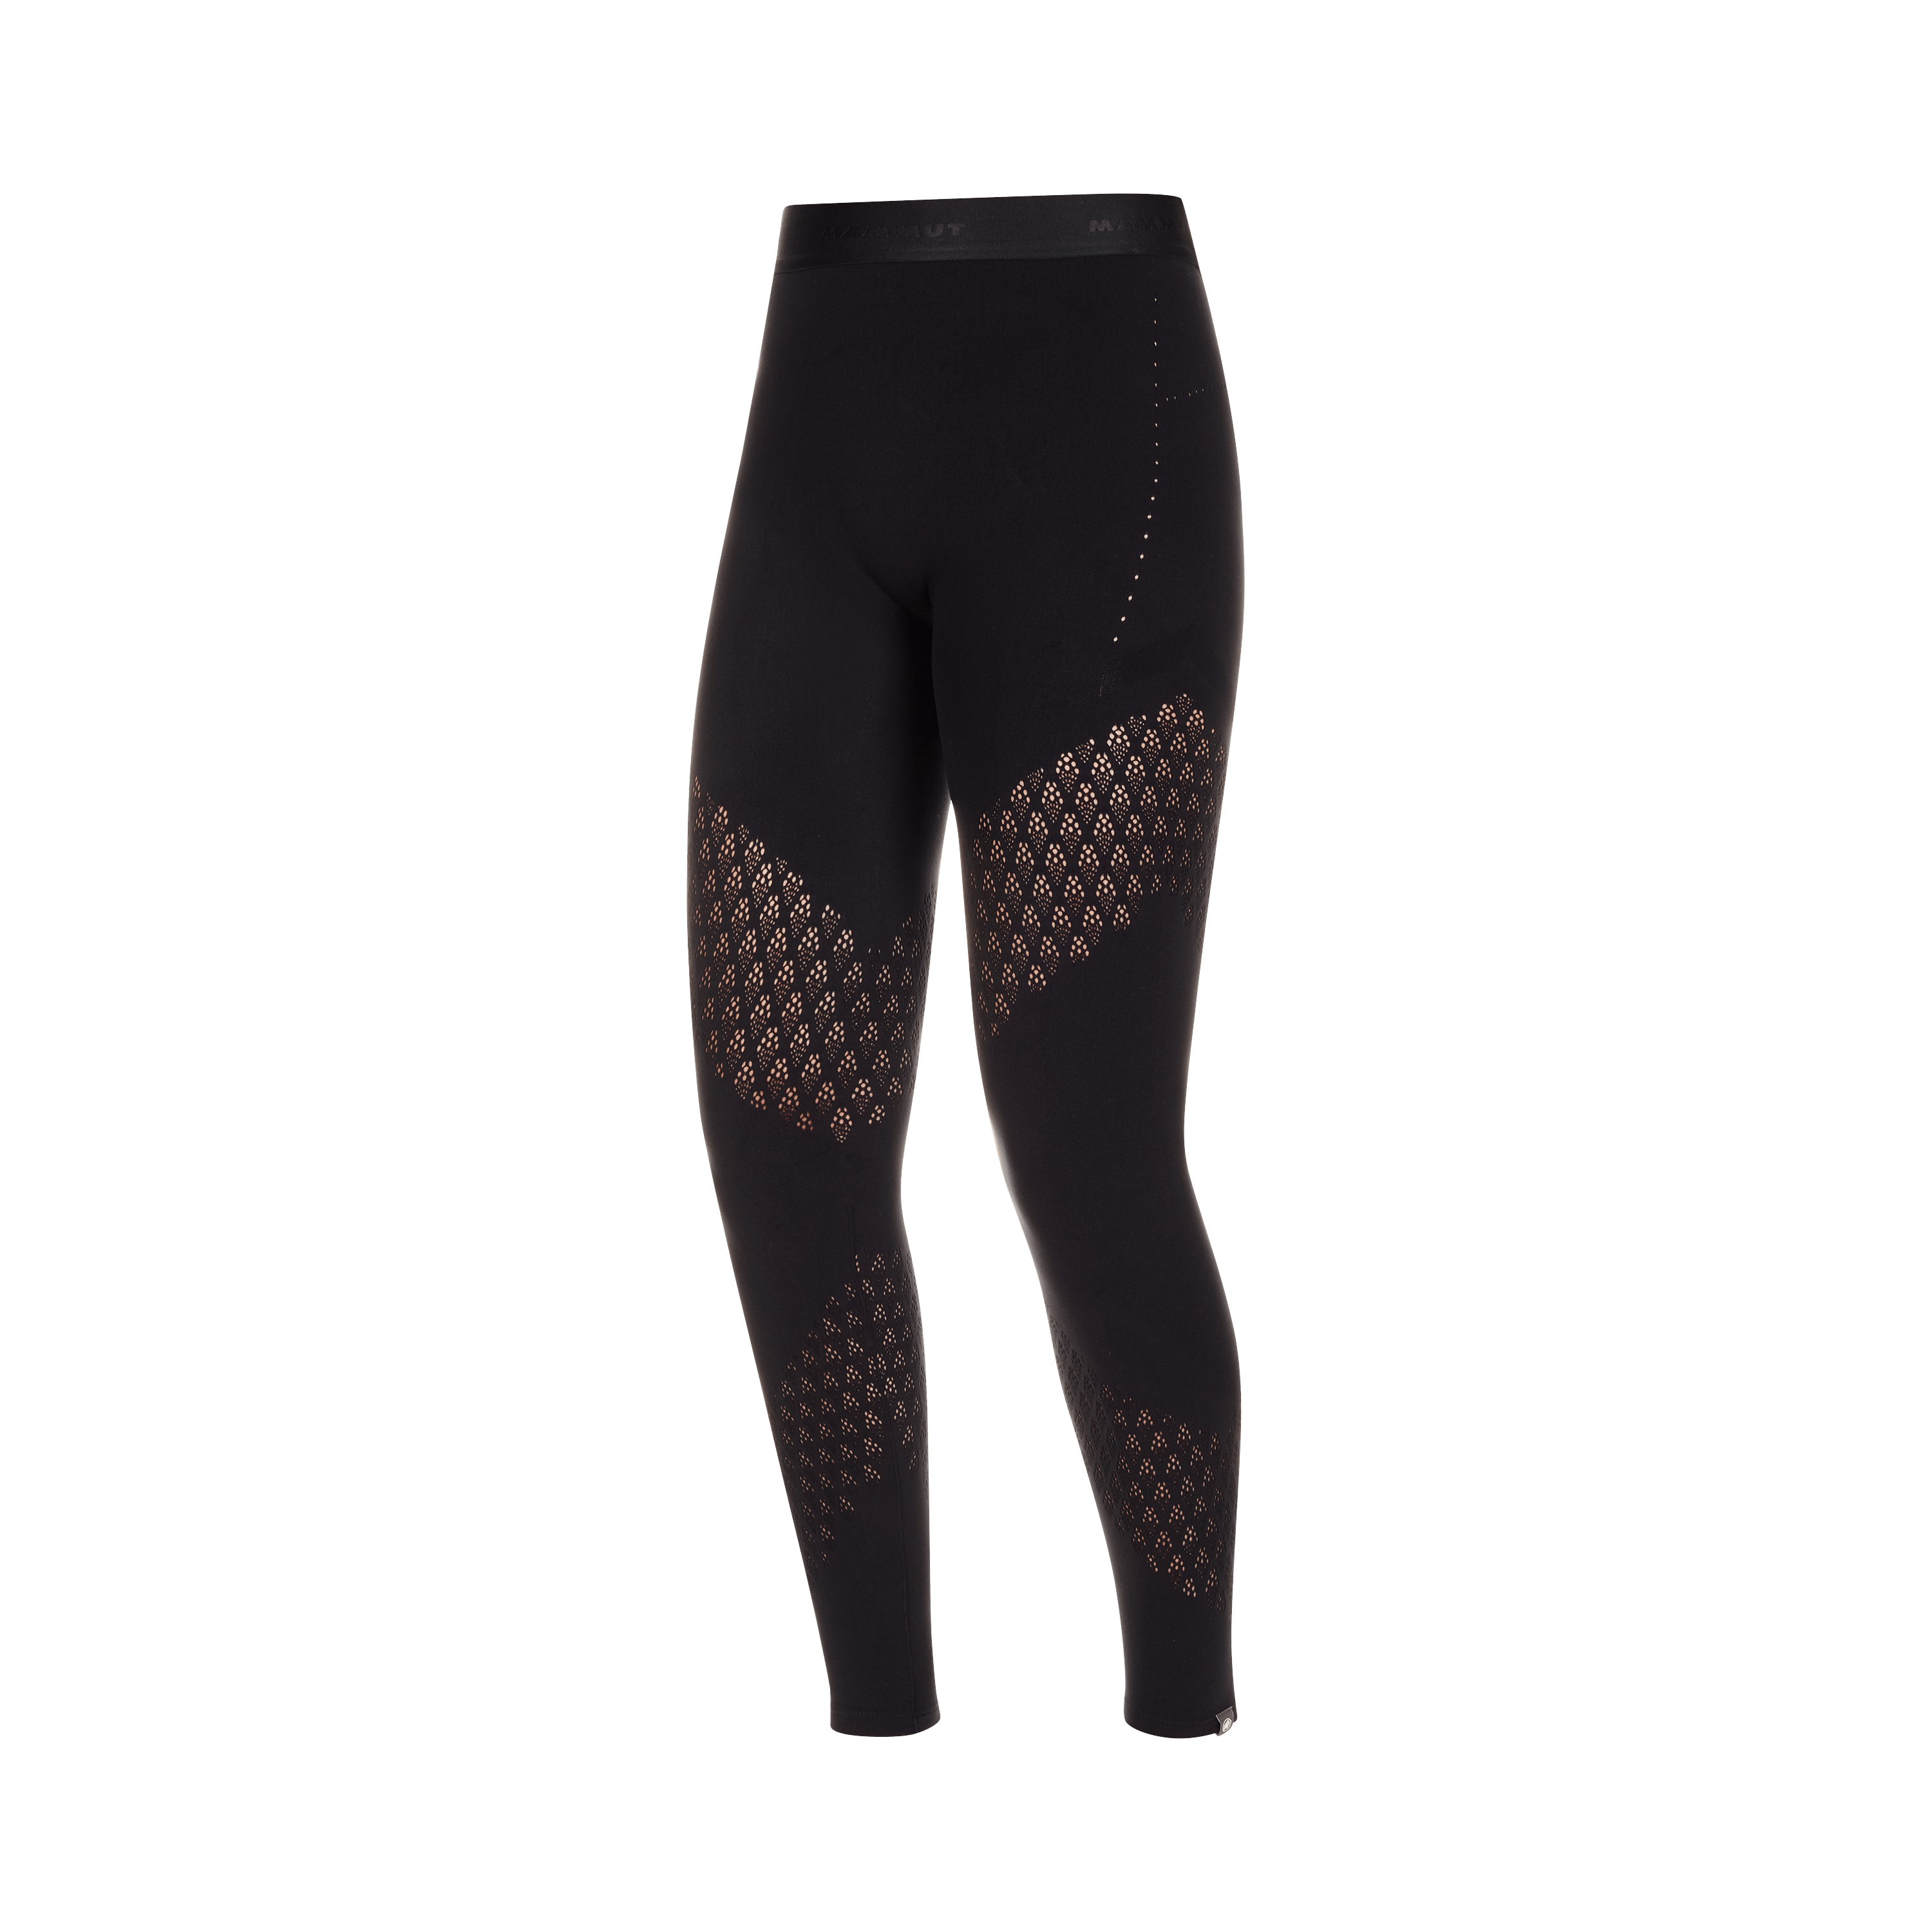 Aelectra Tights Women